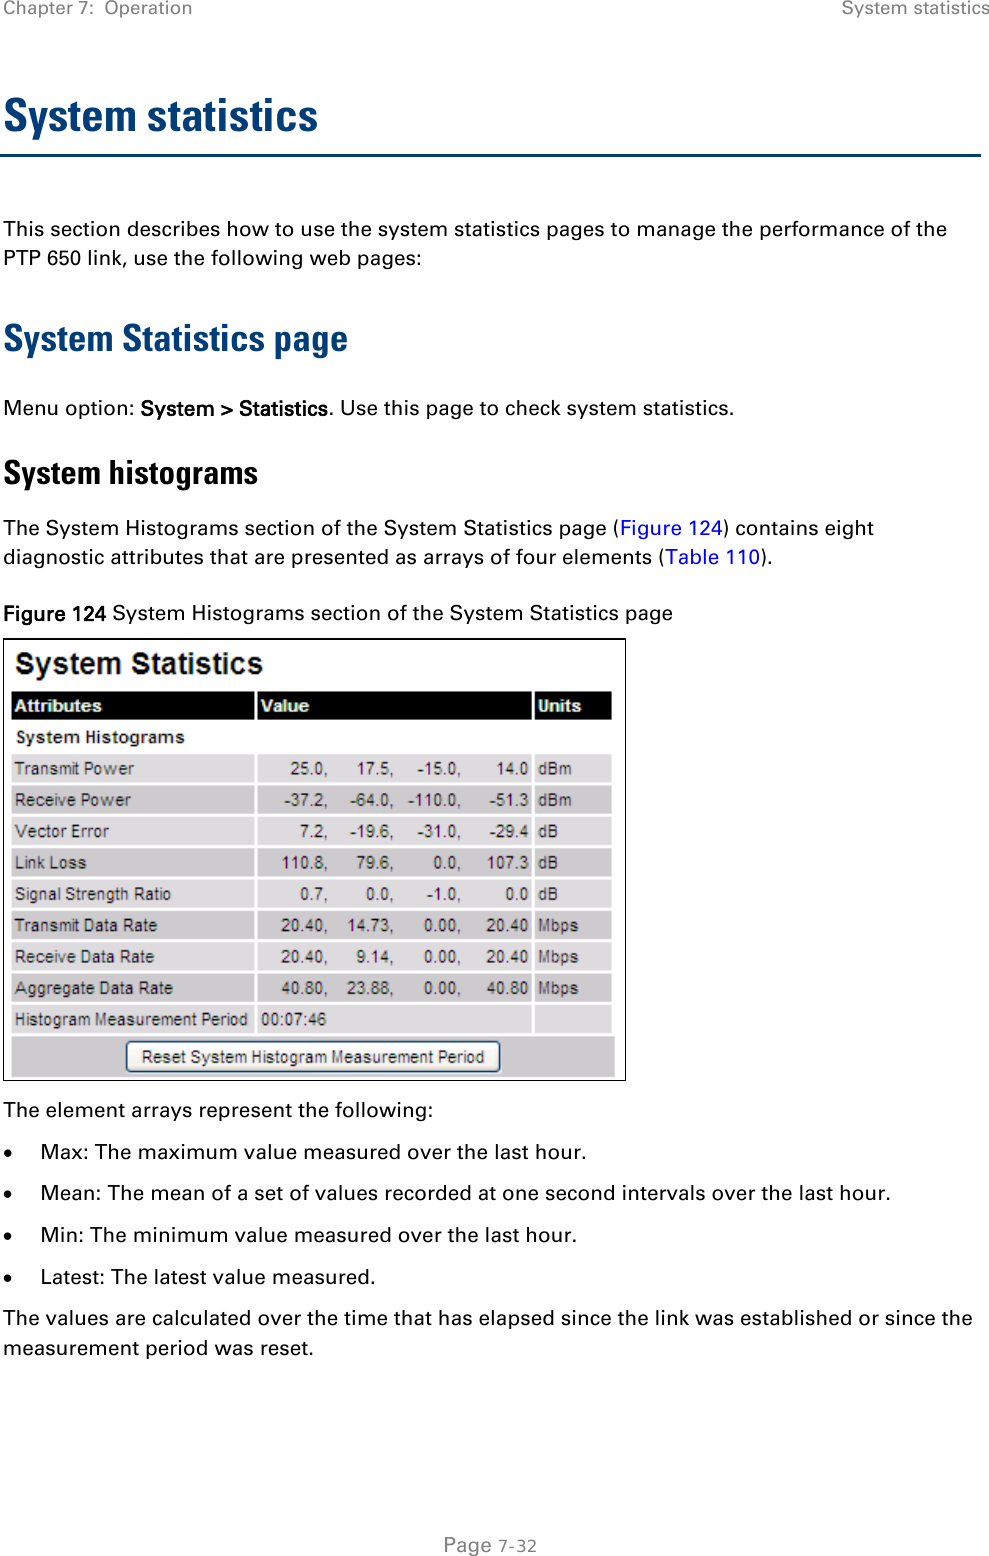 Chapter 7:  Operation System statistics  System statistics This section describes how to use the system statistics pages to manage the performance of the PTP 650 link, use the following web pages: System Statistics page Menu option: System &gt; Statistics. Use this page to check system statistics.  System histograms The System Histograms section of the System Statistics page (Figure 124) contains eight diagnostic attributes that are presented as arrays of four elements (Table 110). Figure 124 System Histograms section of the System Statistics page  The element arrays represent the following: • Max: The maximum value measured over the last hour. • Mean: The mean of a set of values recorded at one second intervals over the last hour. • Min: The minimum value measured over the last hour. • Latest: The latest value measured.  The values are calculated over the time that has elapsed since the link was established or since the measurement period was reset.  Page 7-32 